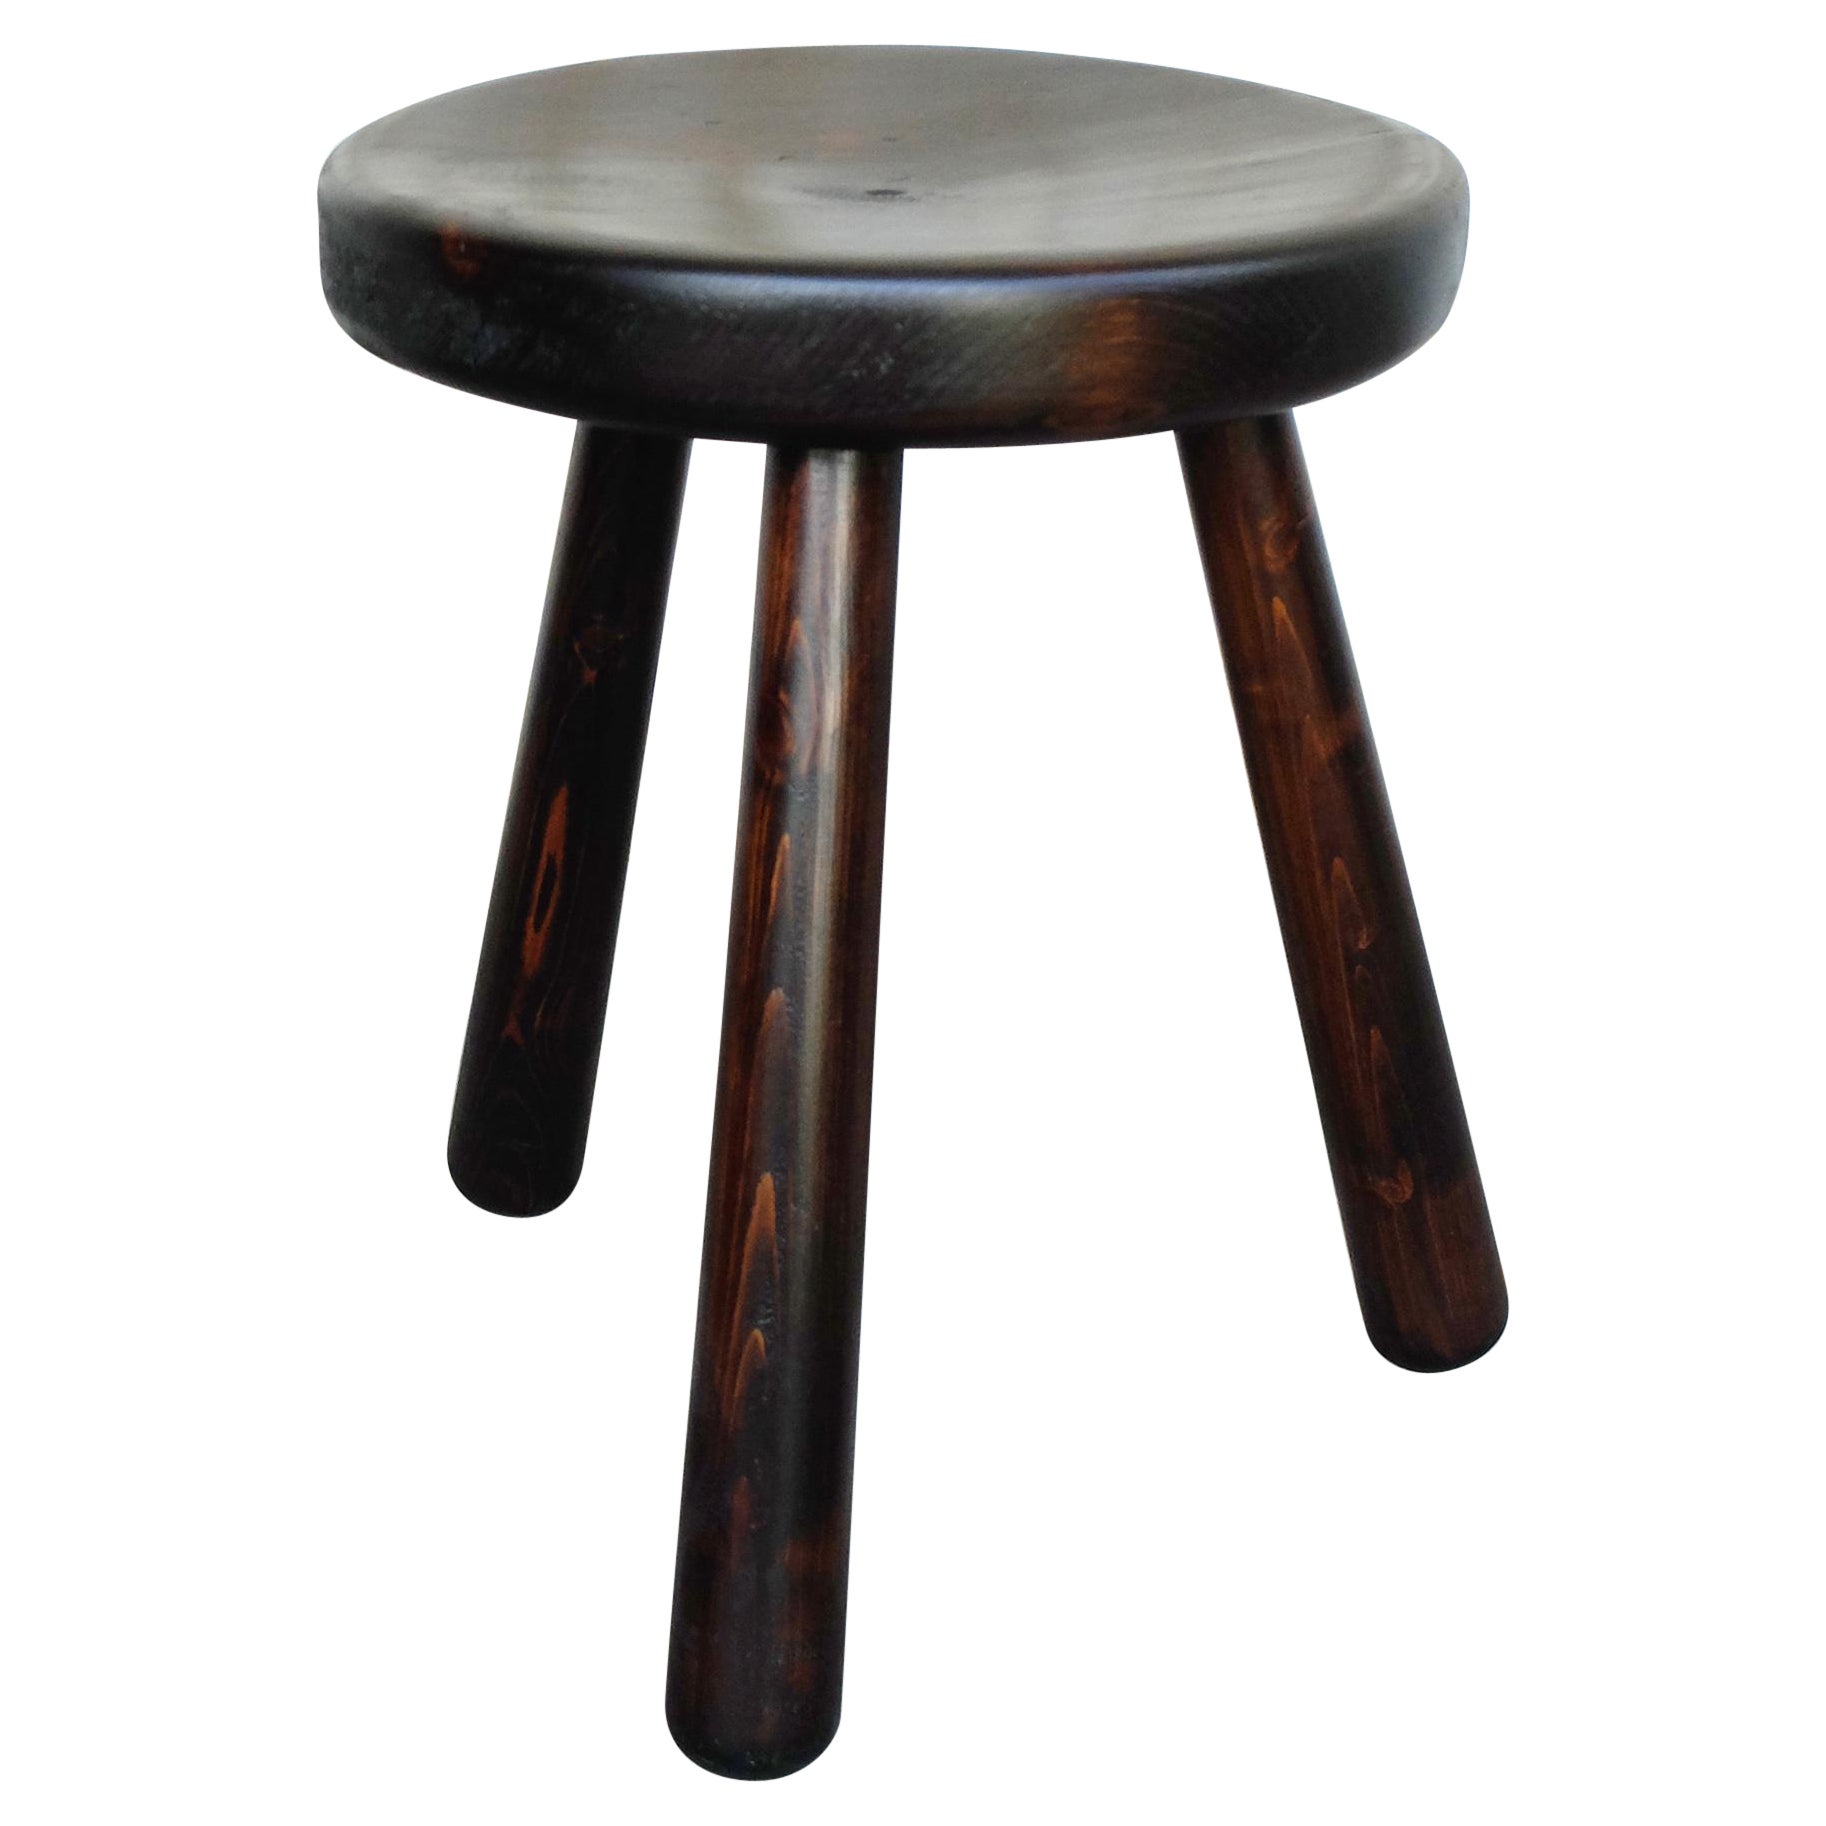 Tripod Stool in the Style of Les Arcs Stools by Charlotte Perriand, France 1960s